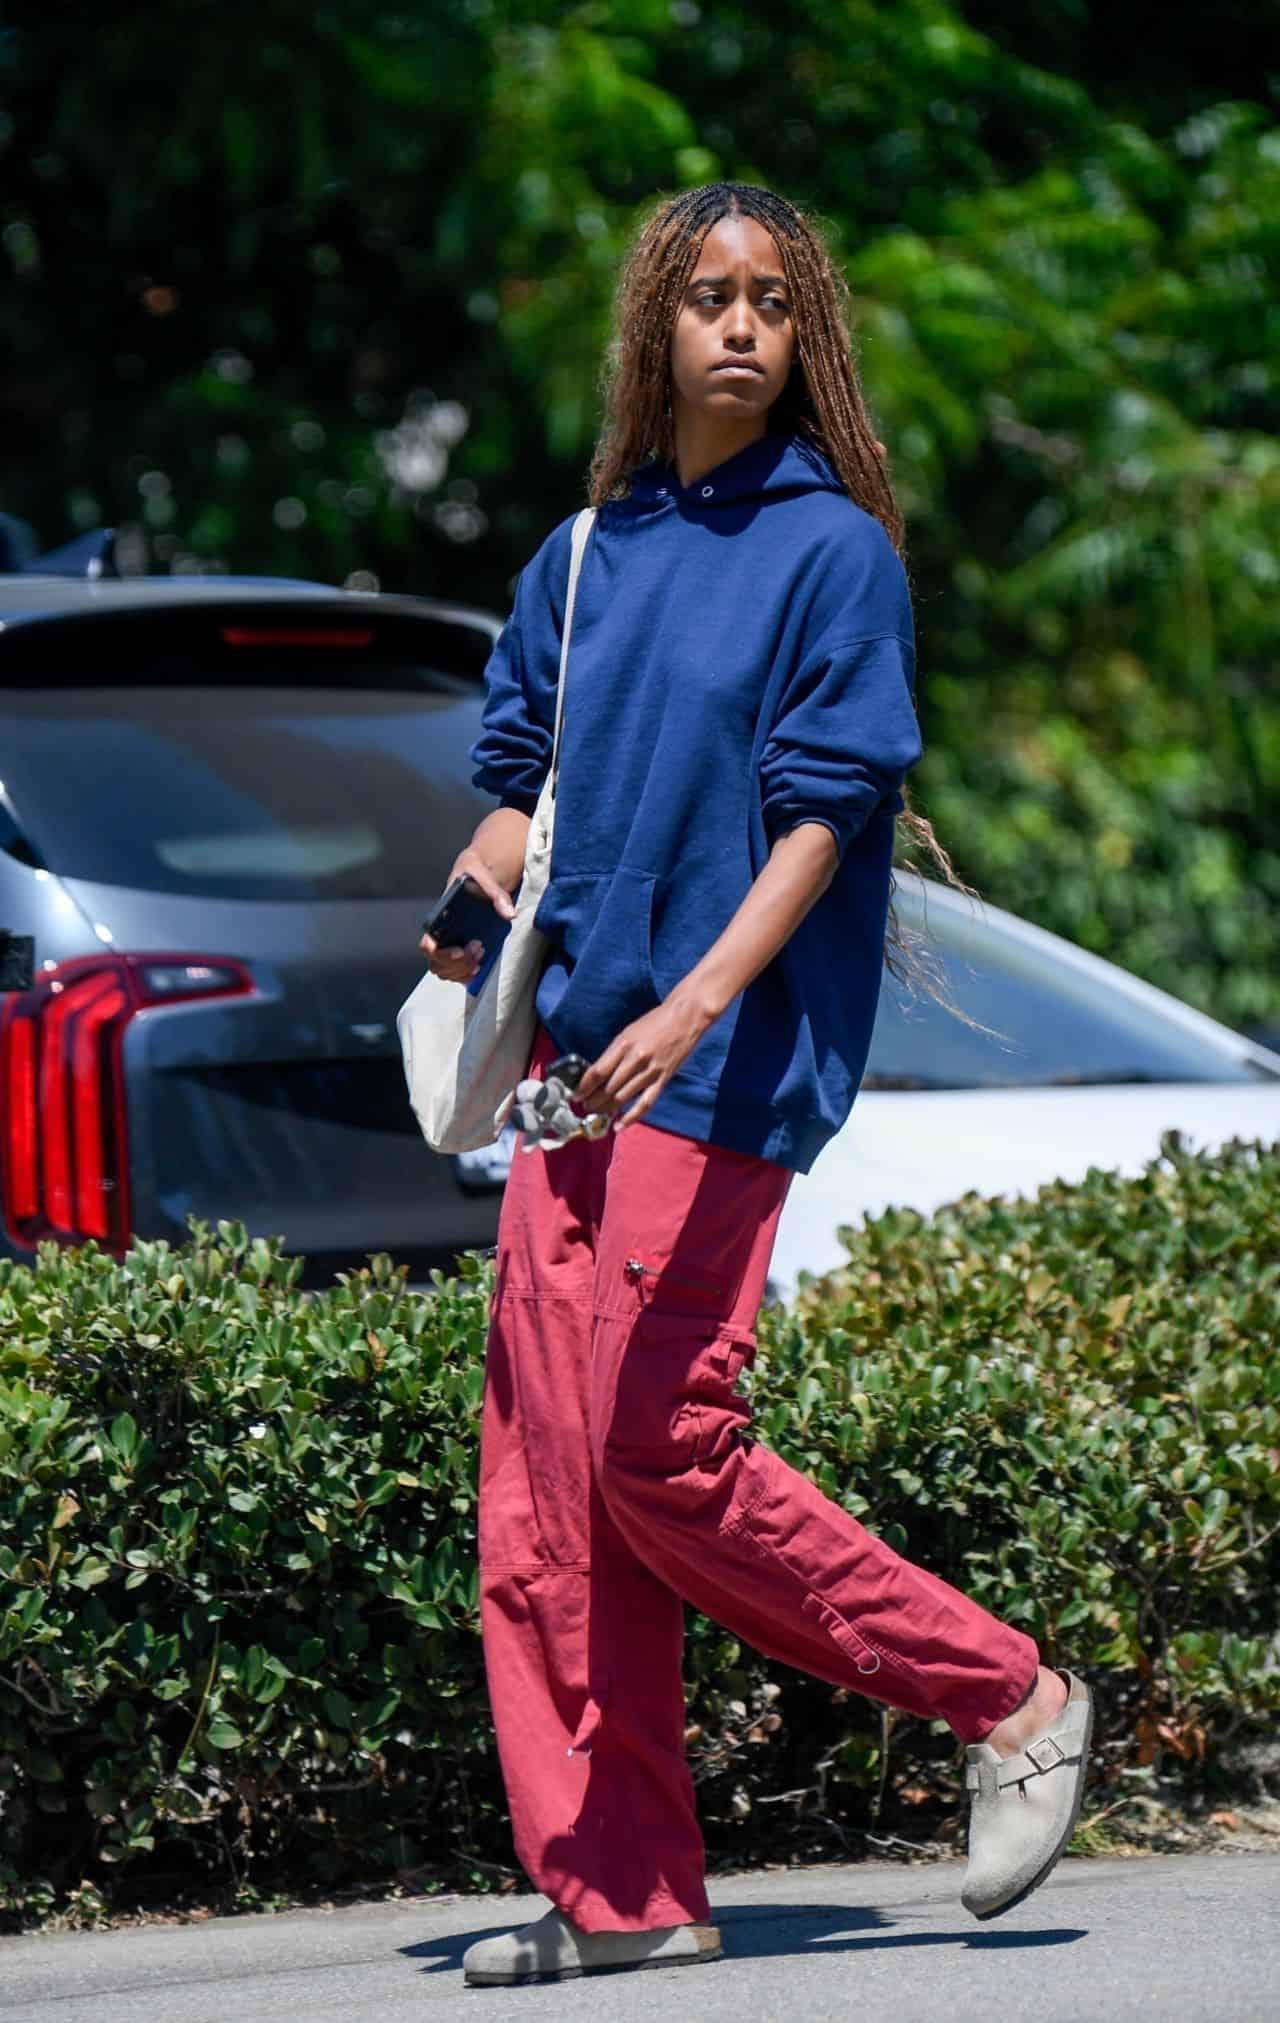 Malia Obama is Seen Casually Strolling Through a Park in Los Angeles